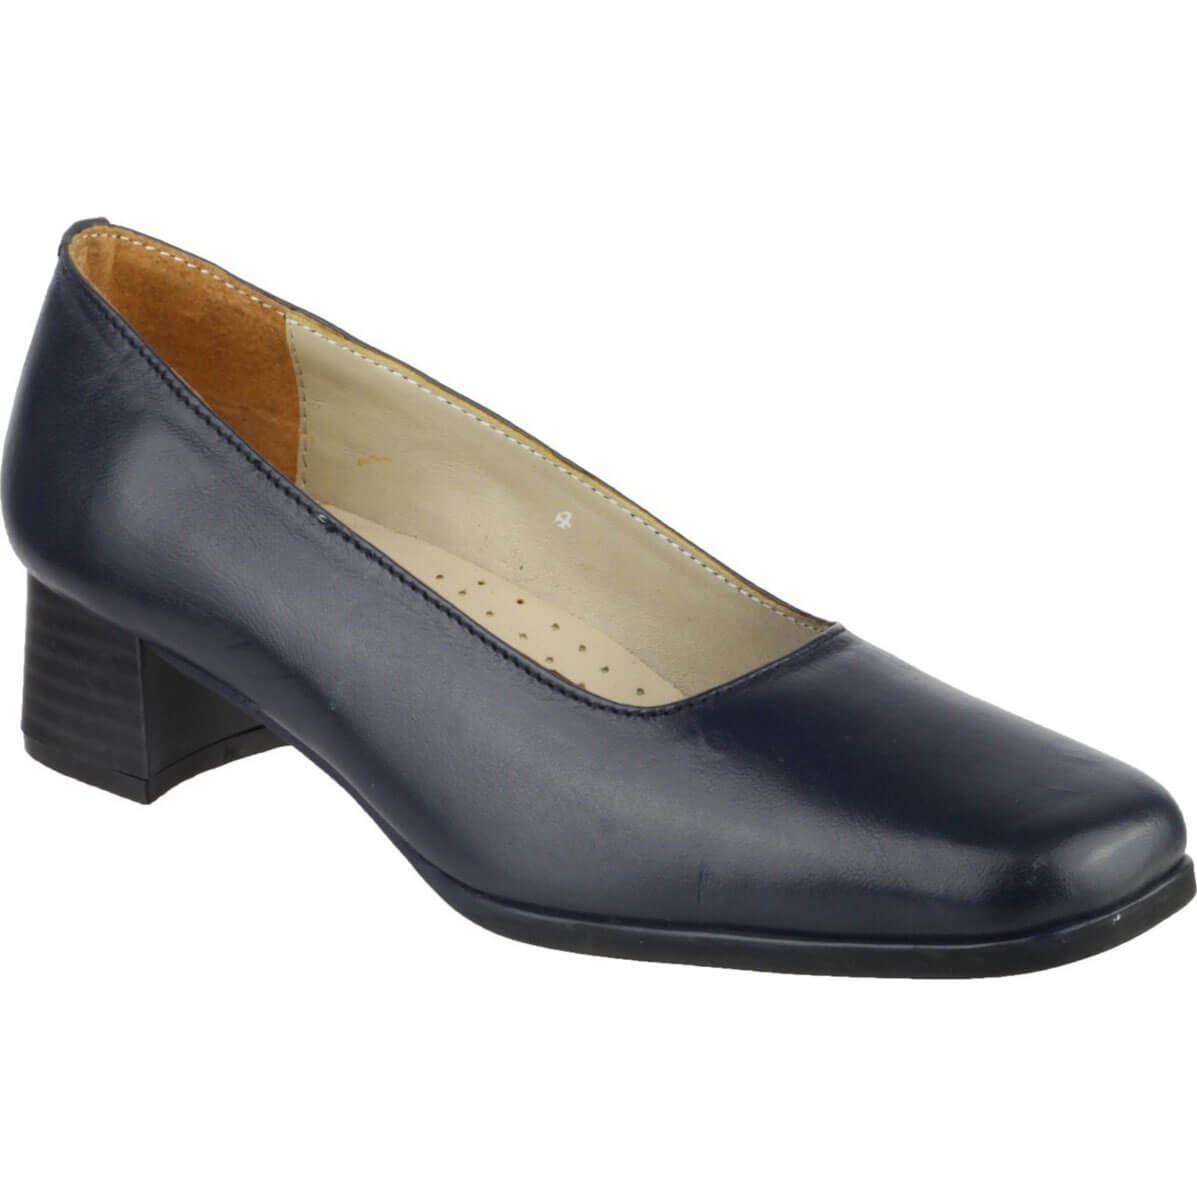 Amblers Walford Ladies Shoes Leather Court | Work Shoes